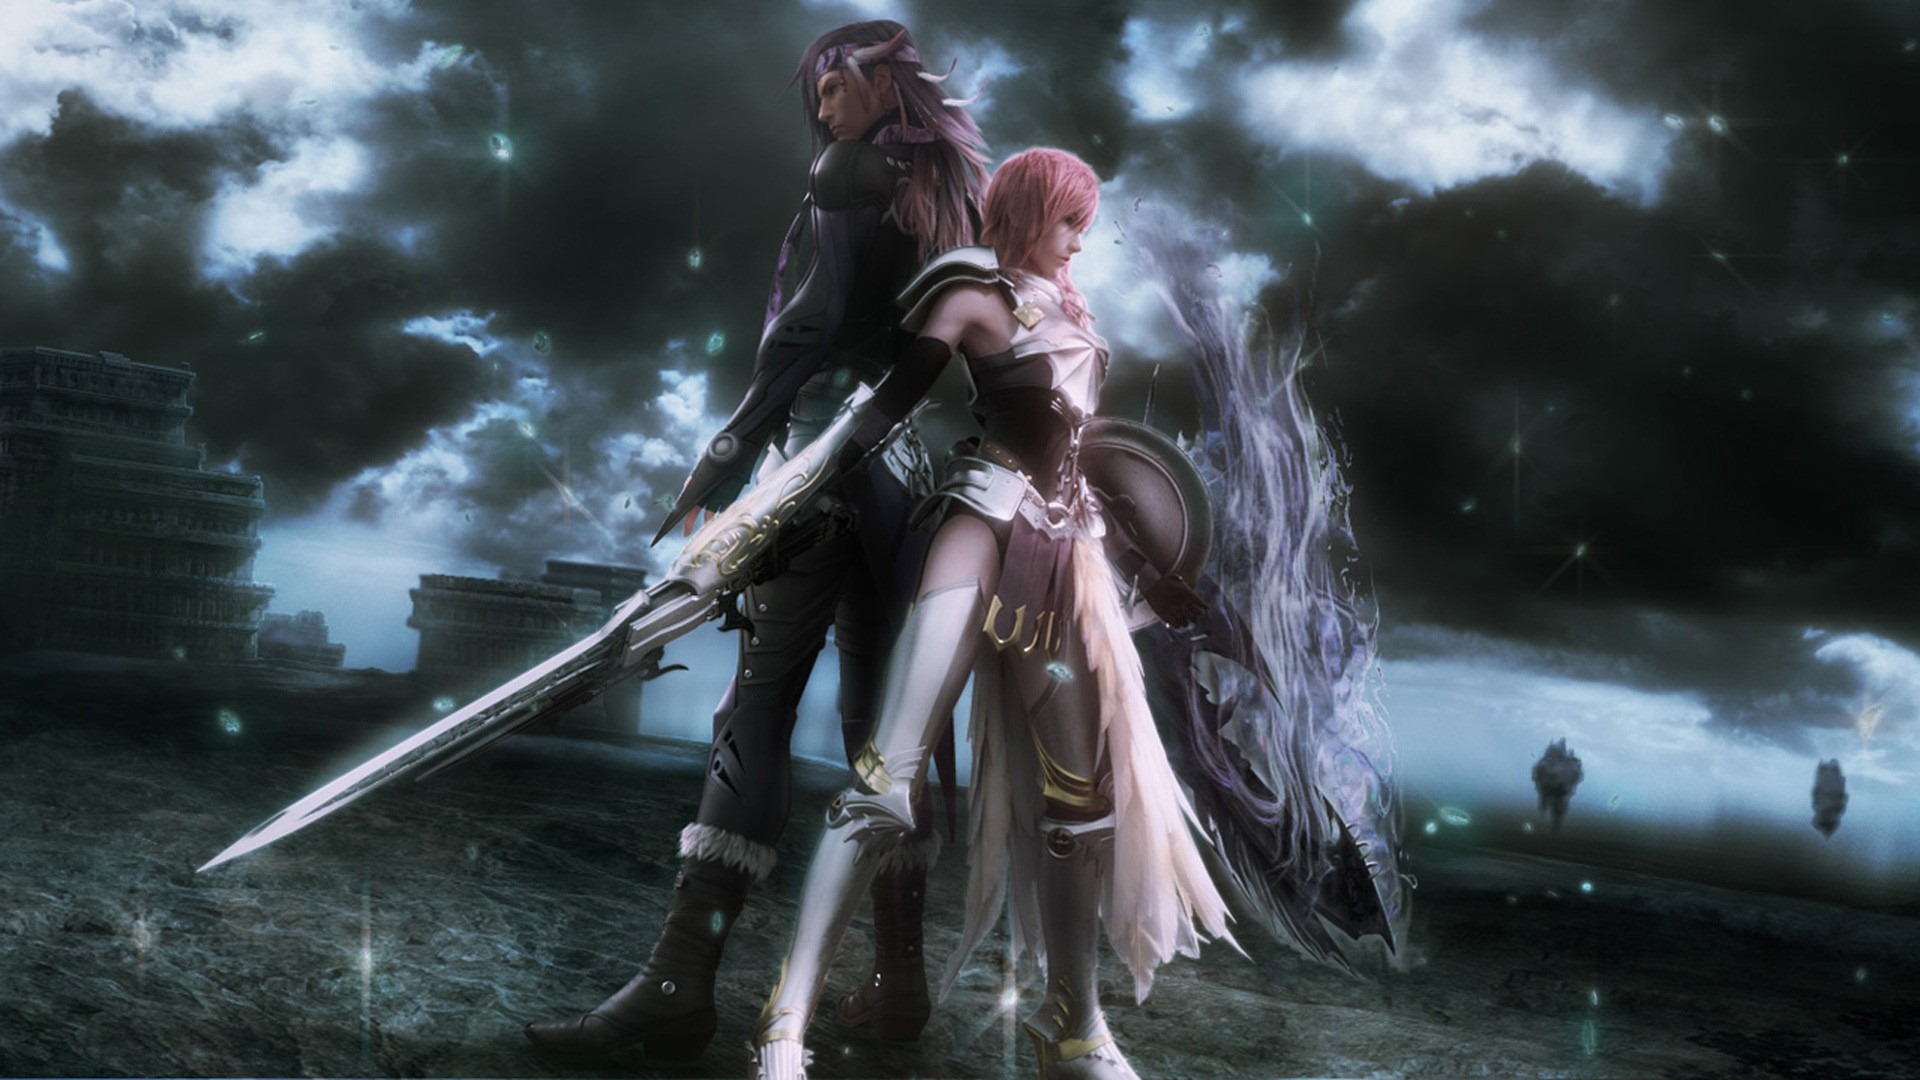 Final Fantasy XIII 2 Wallpapers Free Downloads inMotion Gaming